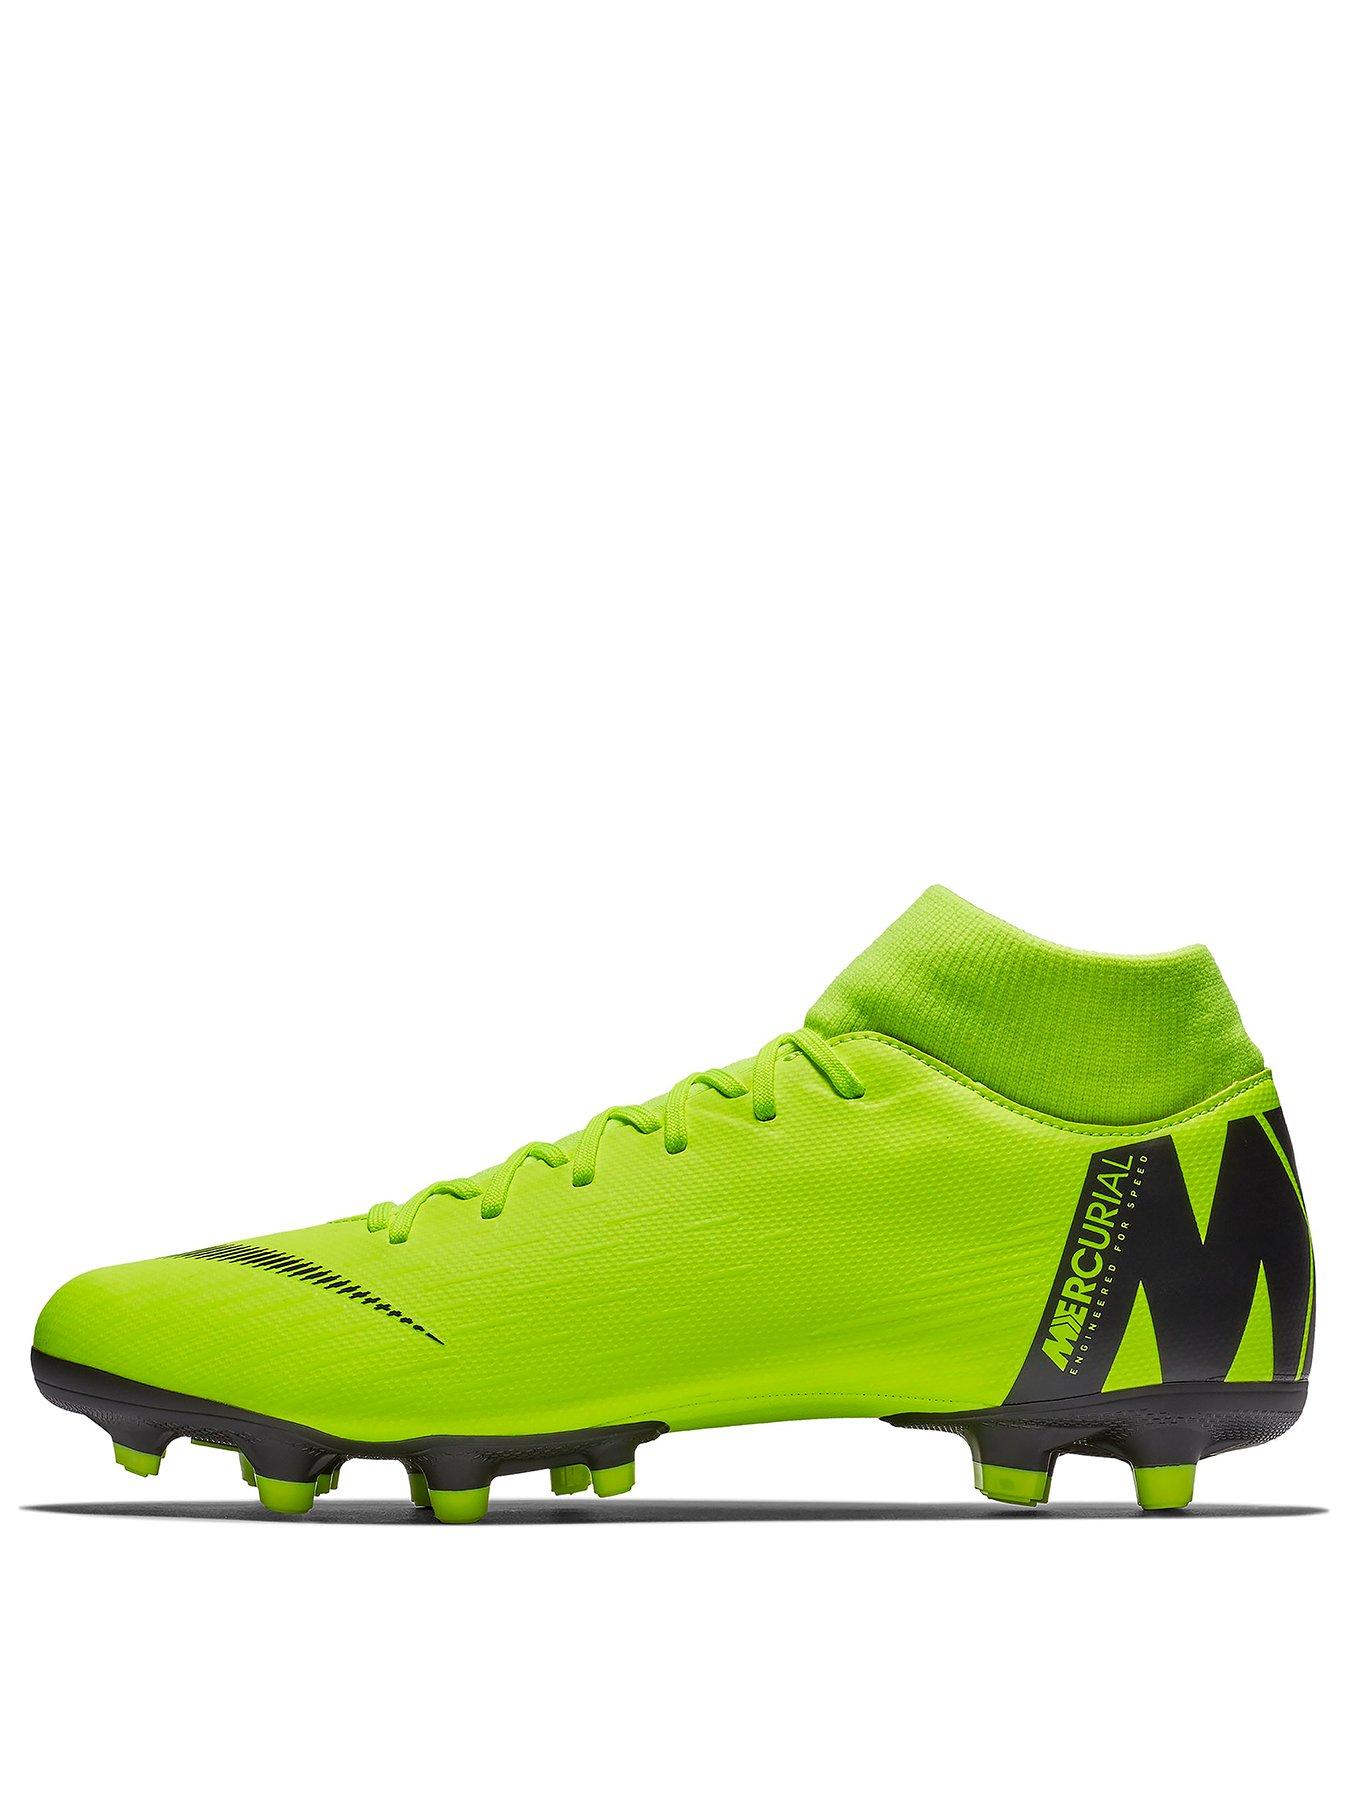 Nike Magista Obra Sg pro ACC Soccer Cleats 13 Superfly